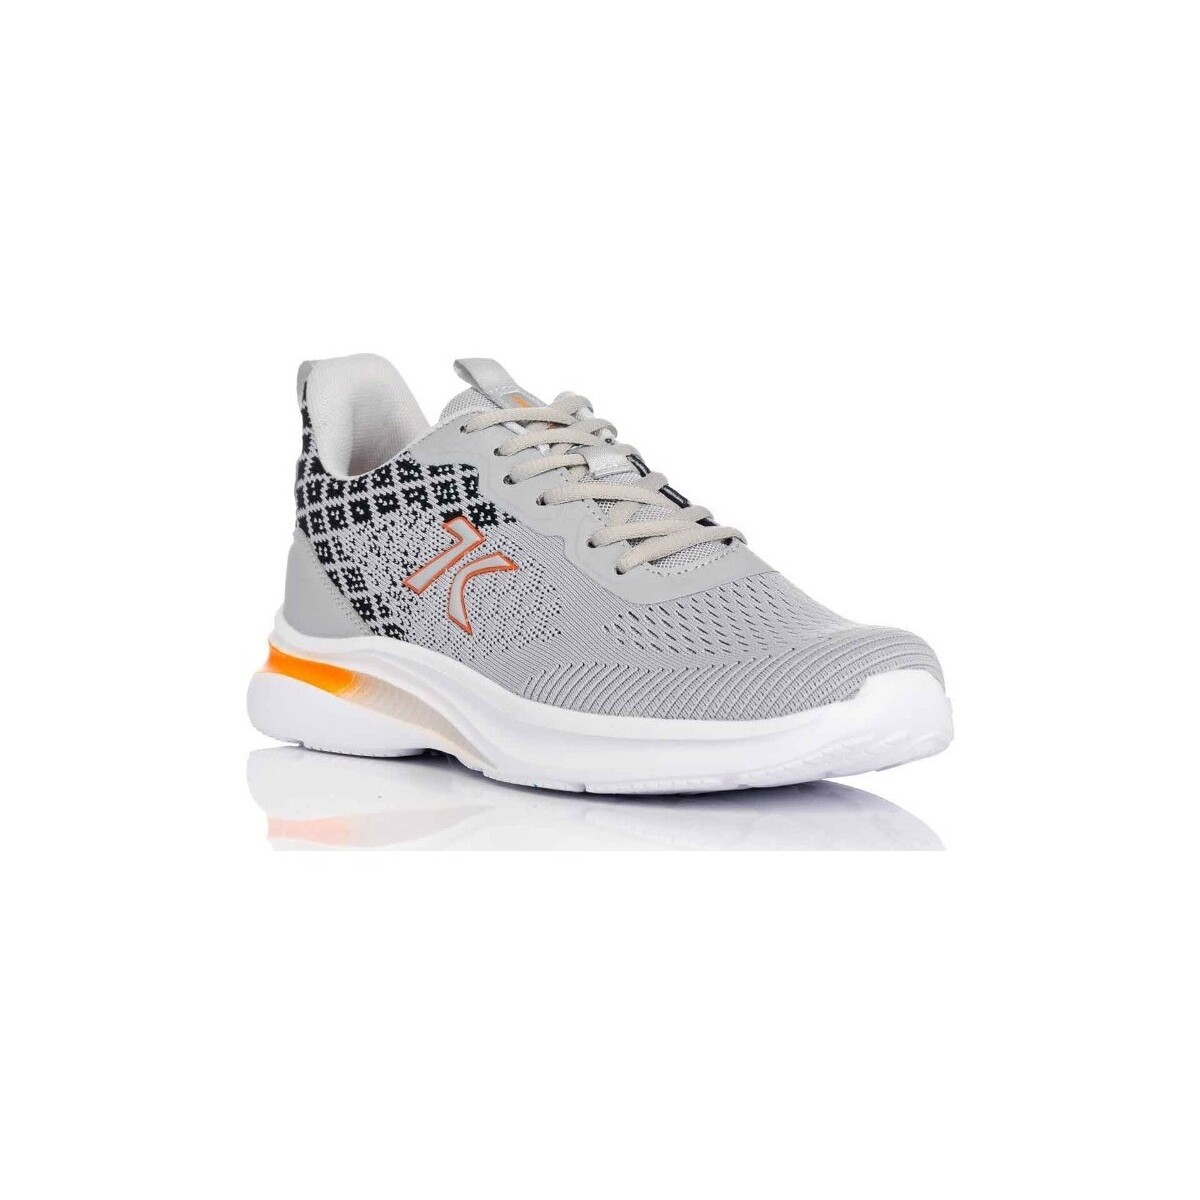 Chaussures Homme Fitness / Training Sweden Kle 231140 Gris